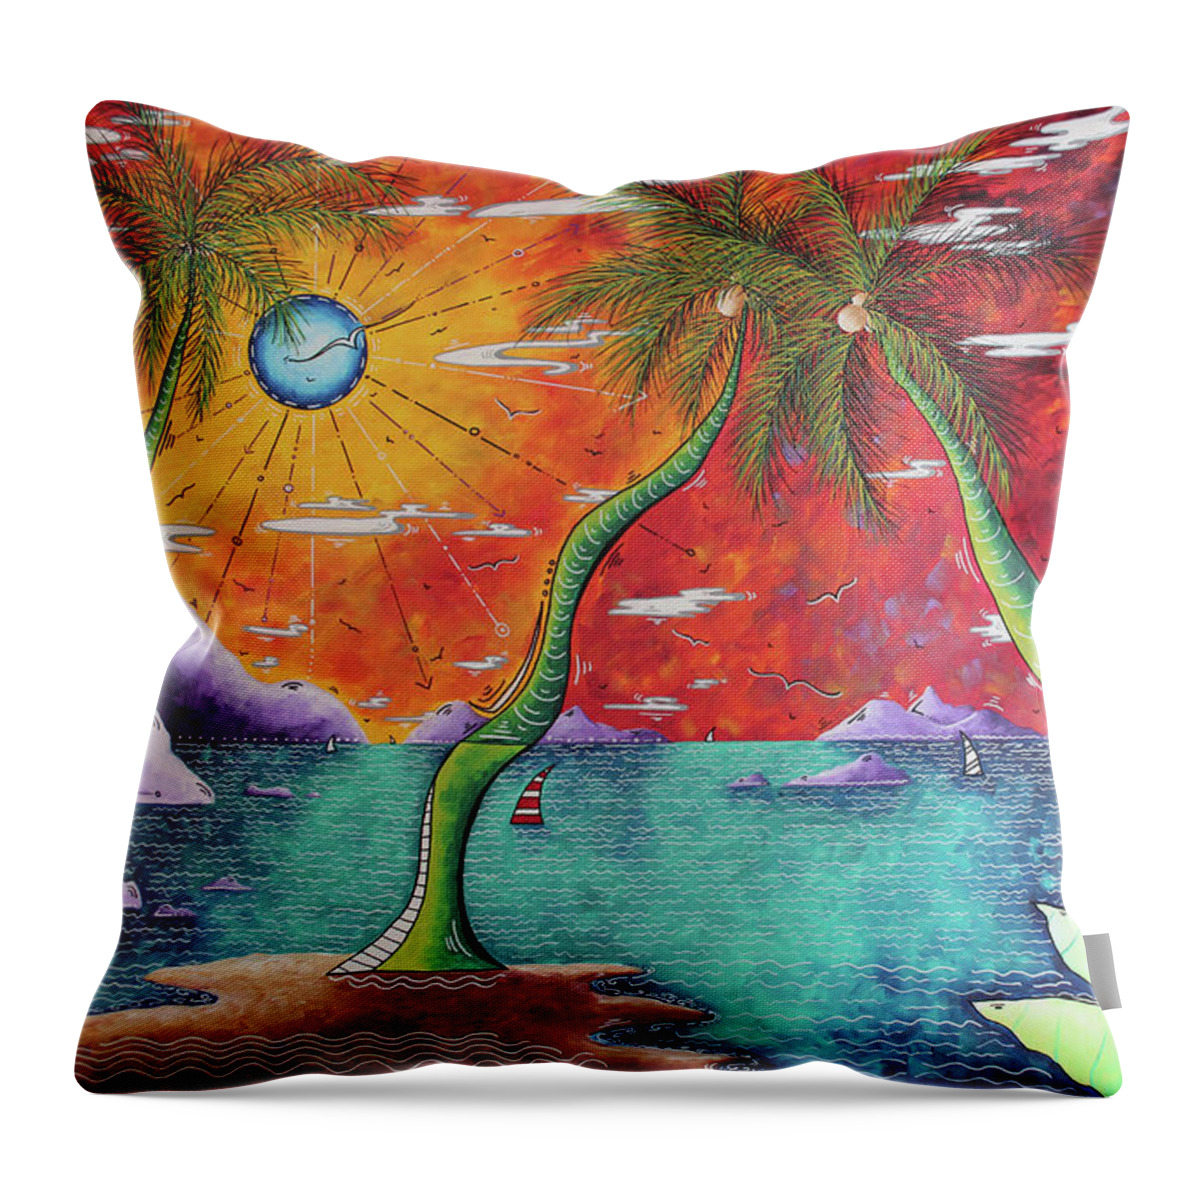 Tropical Throw Pillow featuring the painting Take Me to the Tropics Tropical Surrealism MAD Wonderland by Megan Duncanson by Megan Aroon